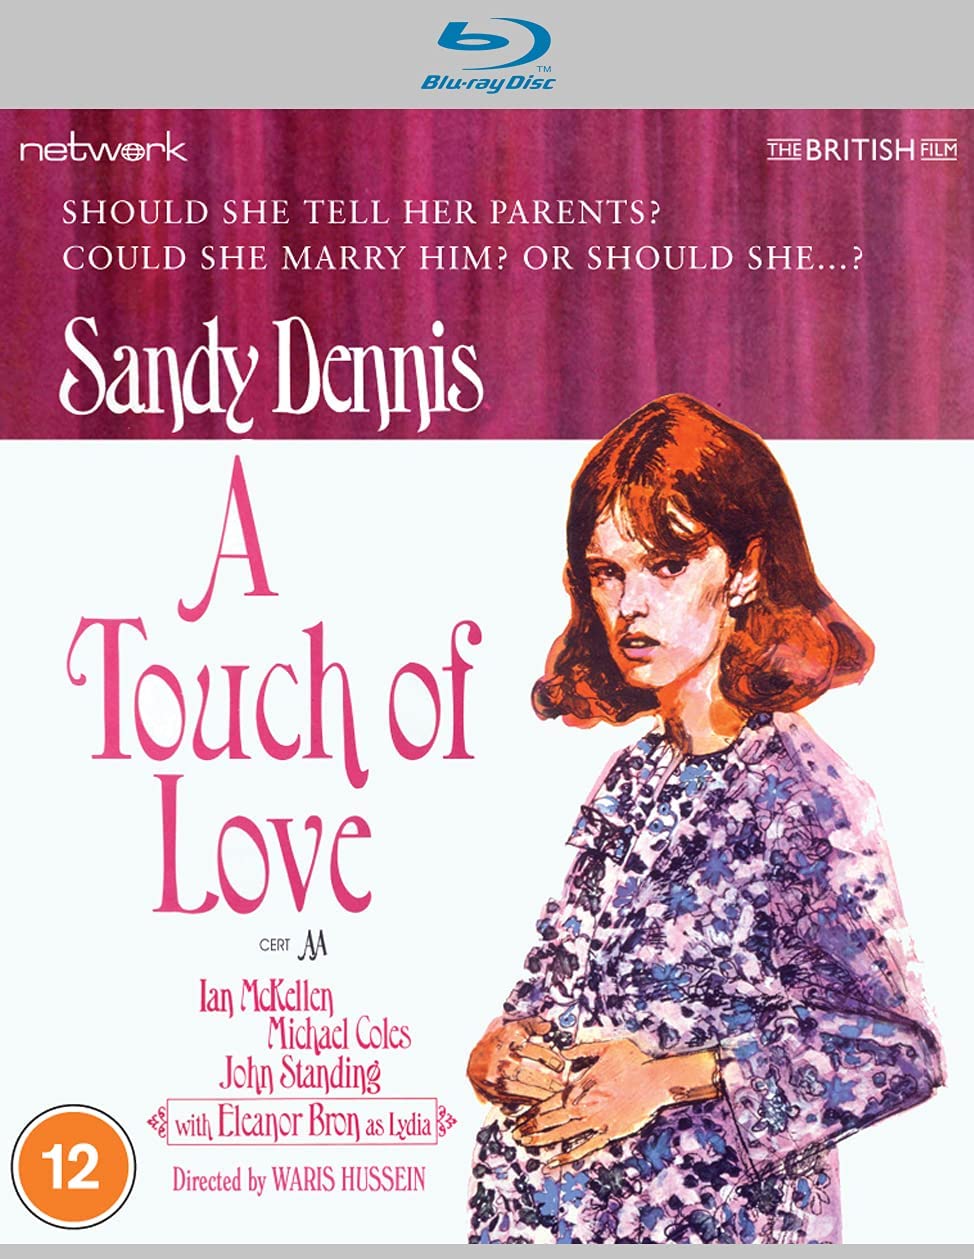 A Touch of Love - Drama [DVD]